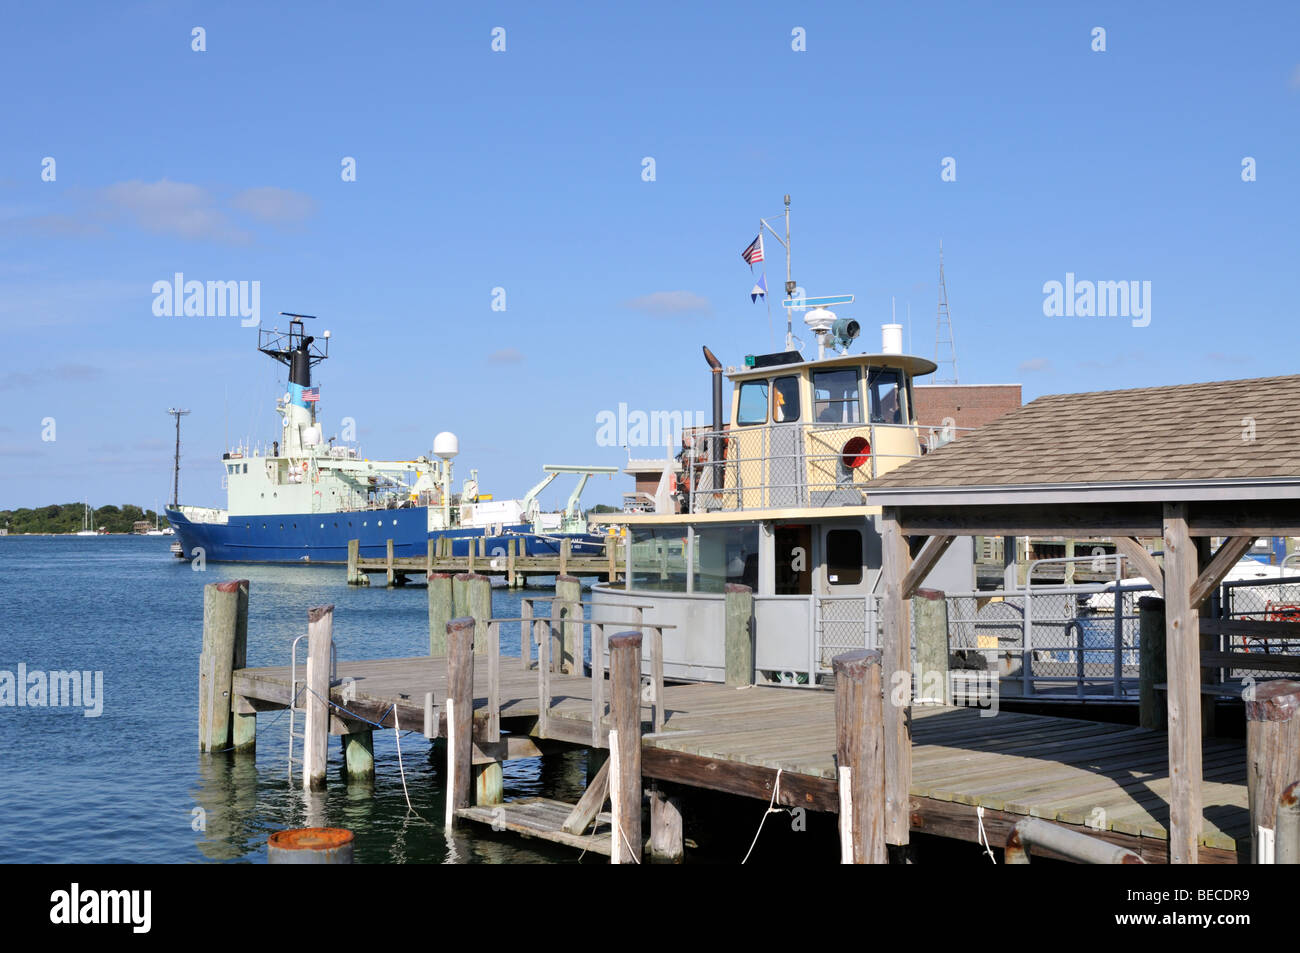 Research ship docked in Woods Hole, Falmouth, Cape Cod at Woods Hole Oceanographic Institute Stock Photo